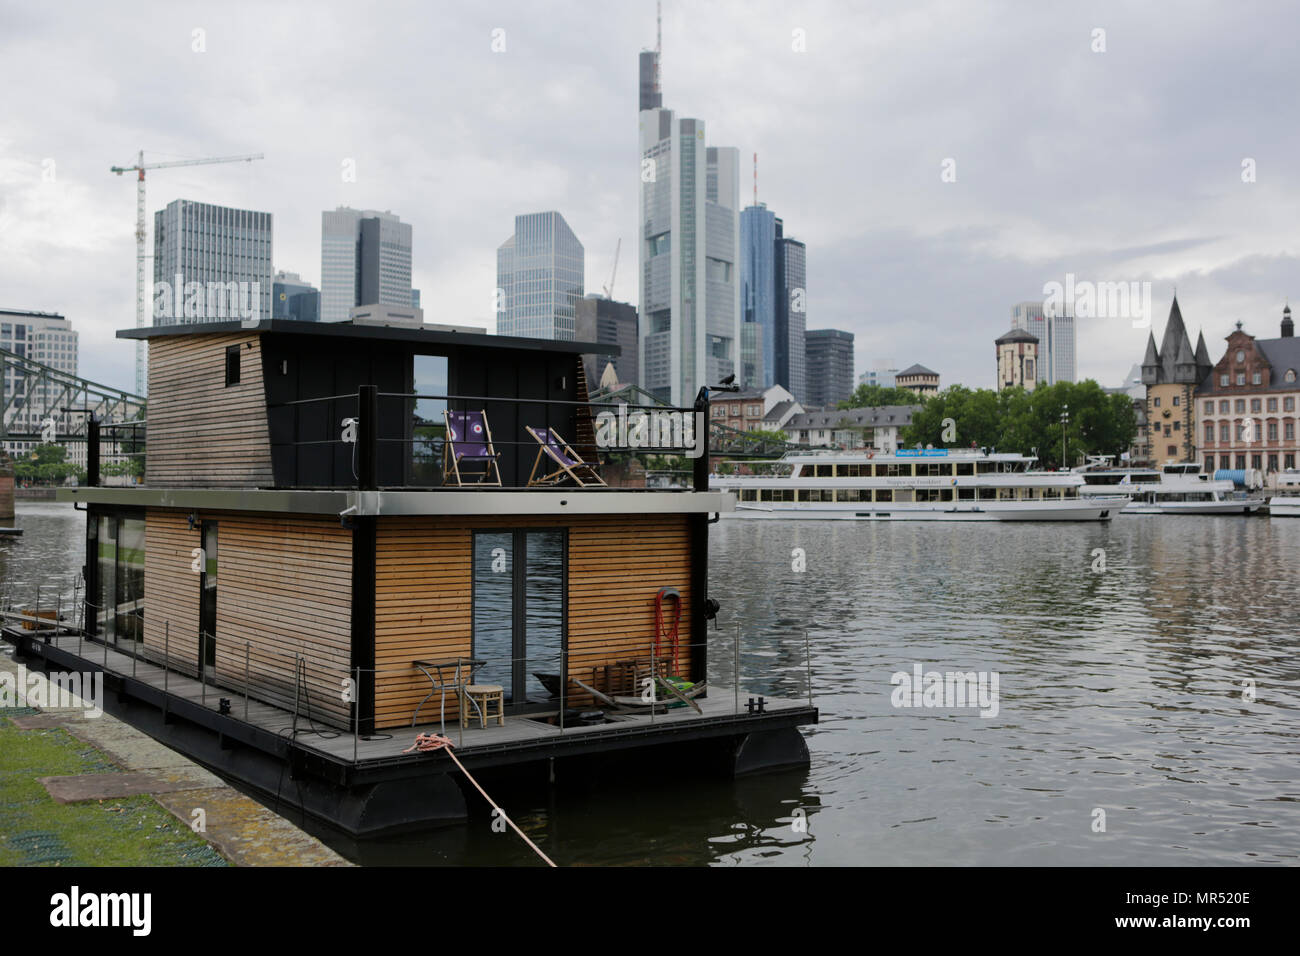 The houseboat of Leo Oswald is moored at the quays at the river Rain, opposite downtown Frankfurt, with the Frankfurt Skyline in the background. 4 new episodes of the relaunch of the long running TV series 'Ein Fall fuer zwei’ (A case for two) are being filmed in Frankfurt for the German state TV broadcaster ZDF (Zweites Deutsches Fernsehen). It stars Antoine Monot, Jr. as defence attorney Benjamin ‘Benni’ Hornberg and Wanja Mues as private investigator Leo Oswald. The episodes are directed by Thomas Nennstiel. The episodes are set to air in October. (Photo by Michael Debets / Pacific Press) Stock Photo